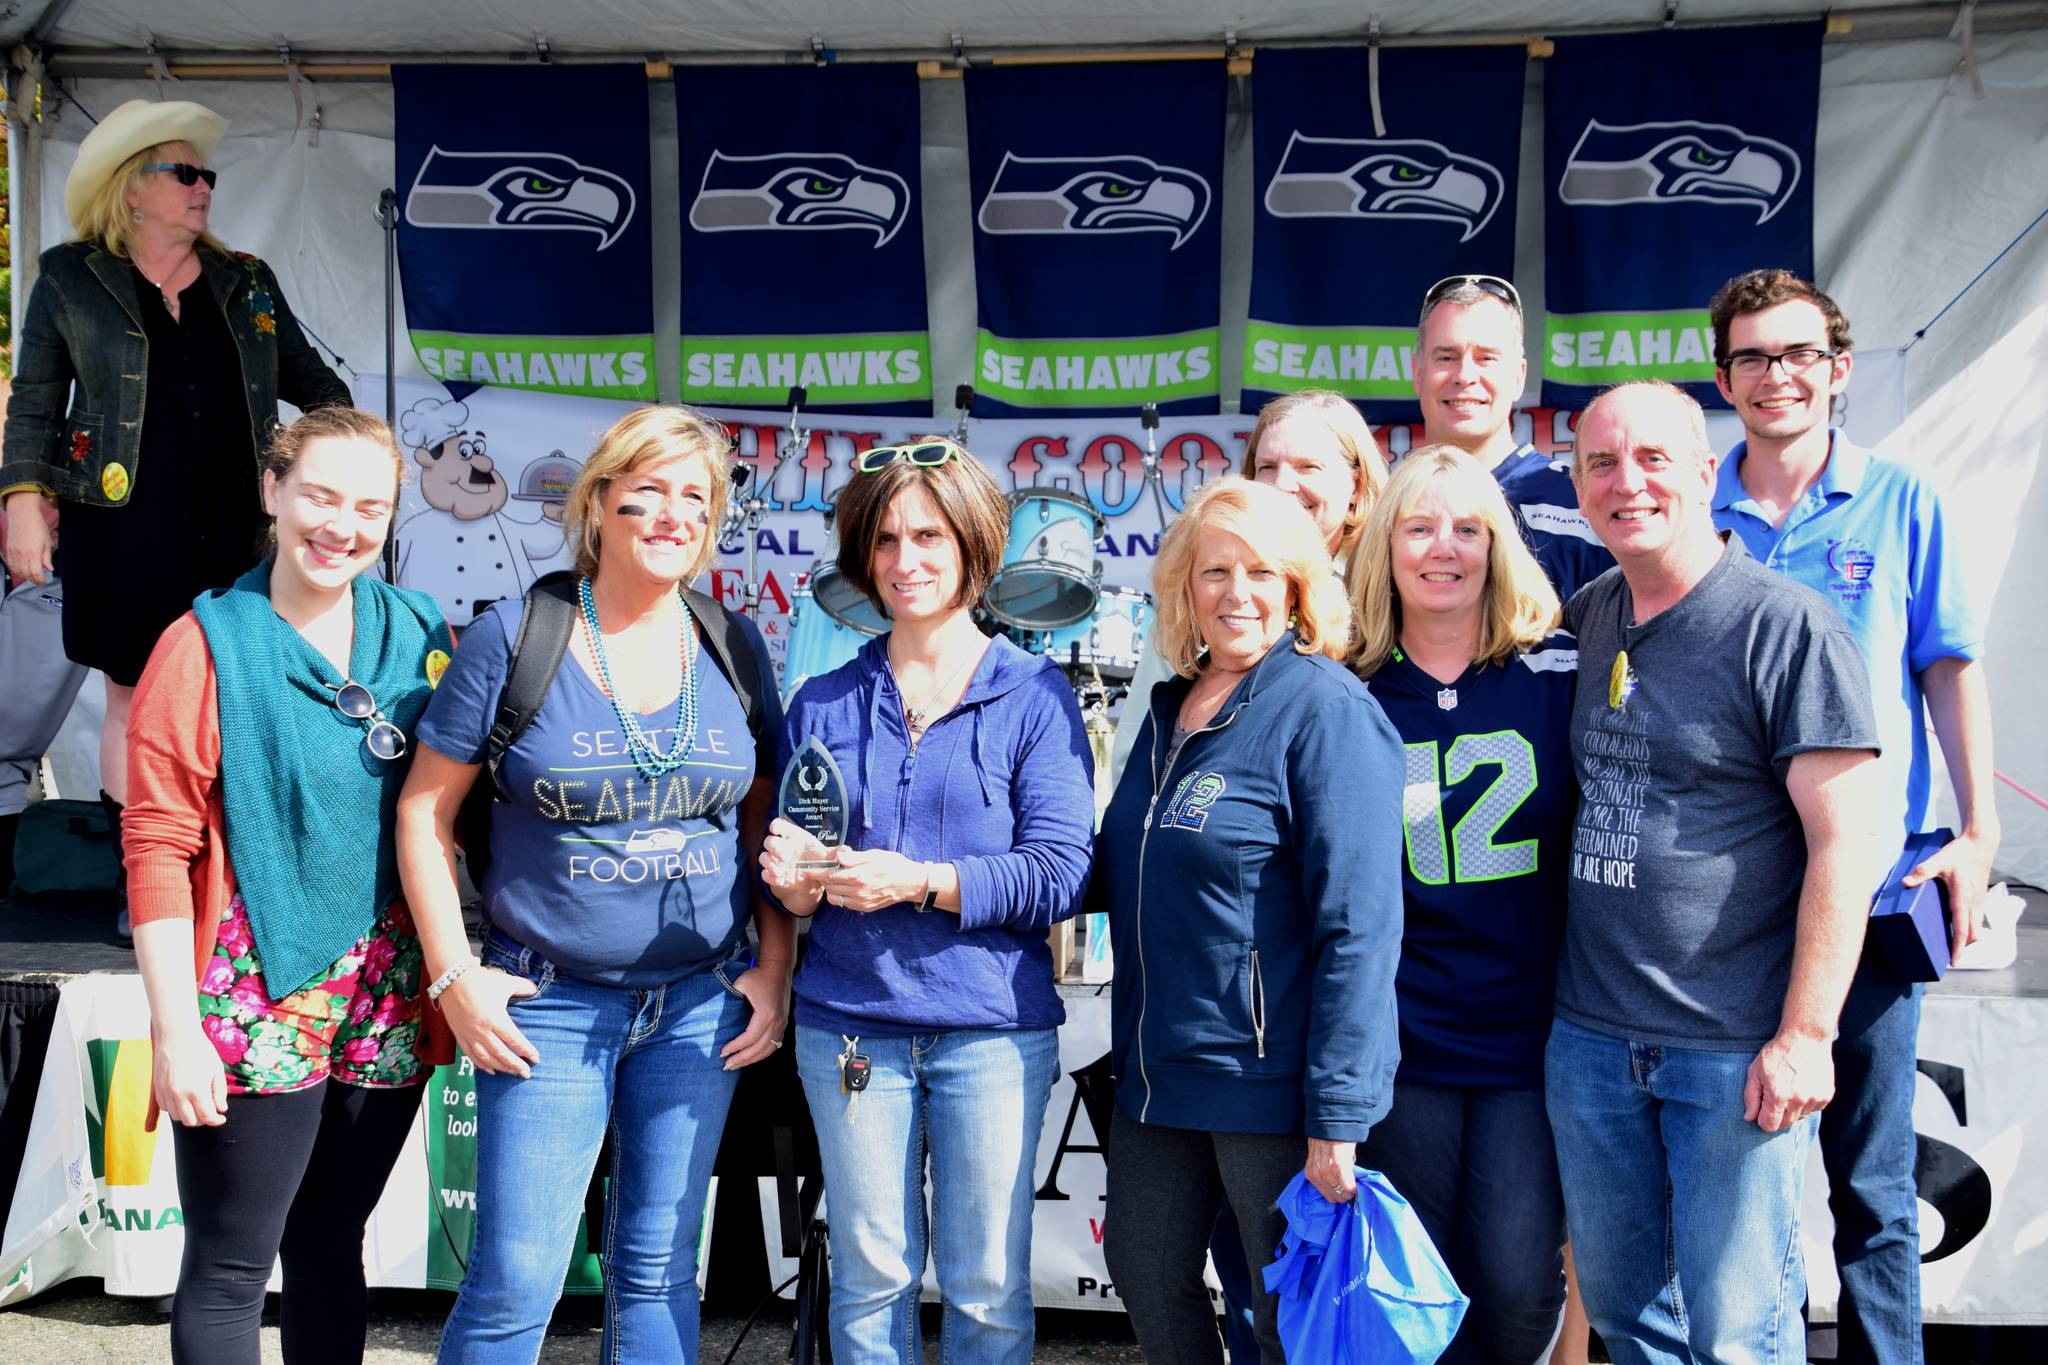 Shelley Pauls (center) received the Dick Mayer Community Service Award at the Federal Way Farmers Market’s Chili Cook-off. Photo courtesy of Bruce Honda